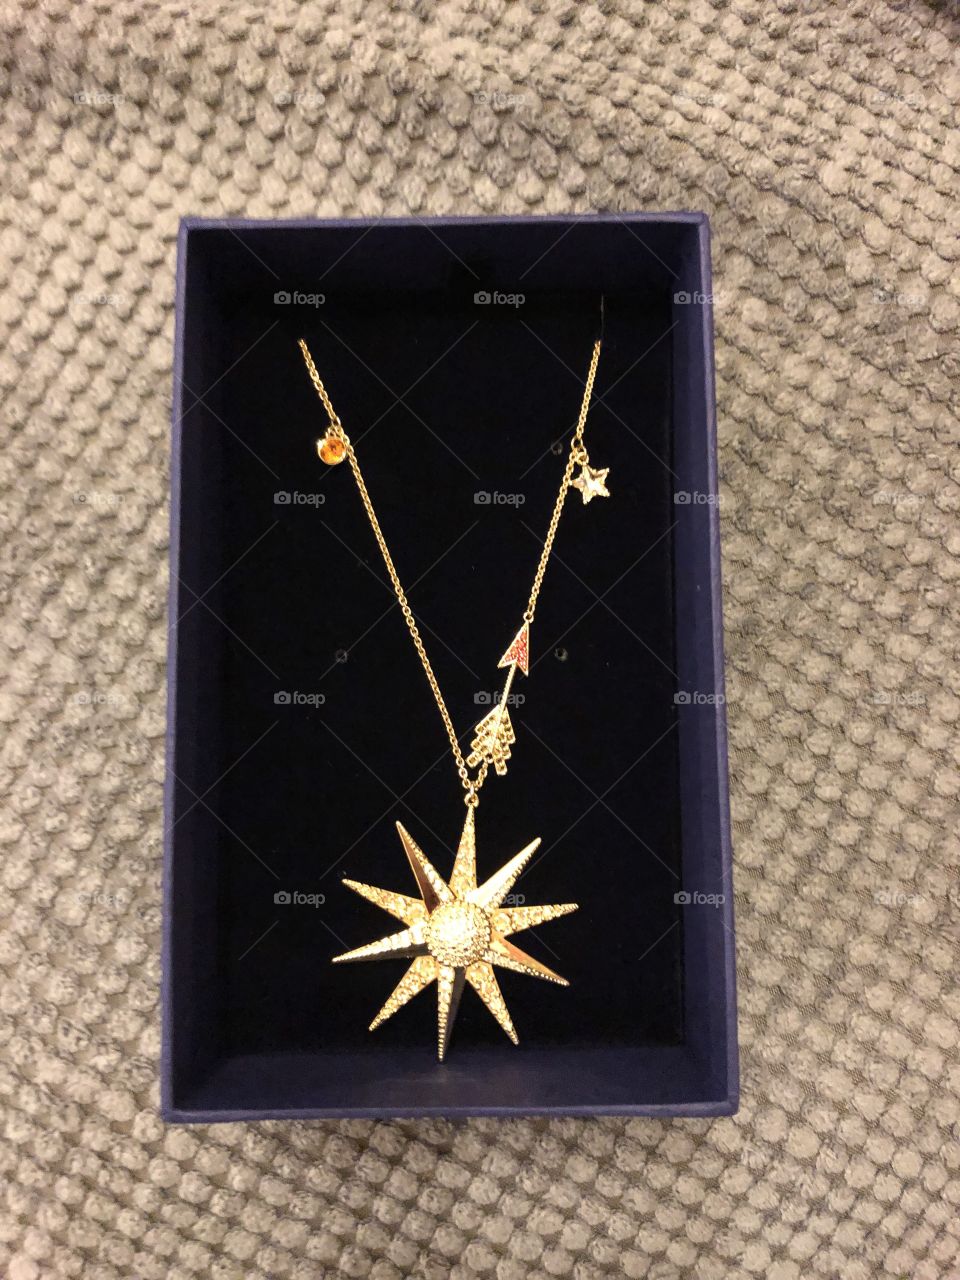 Star necklaces 